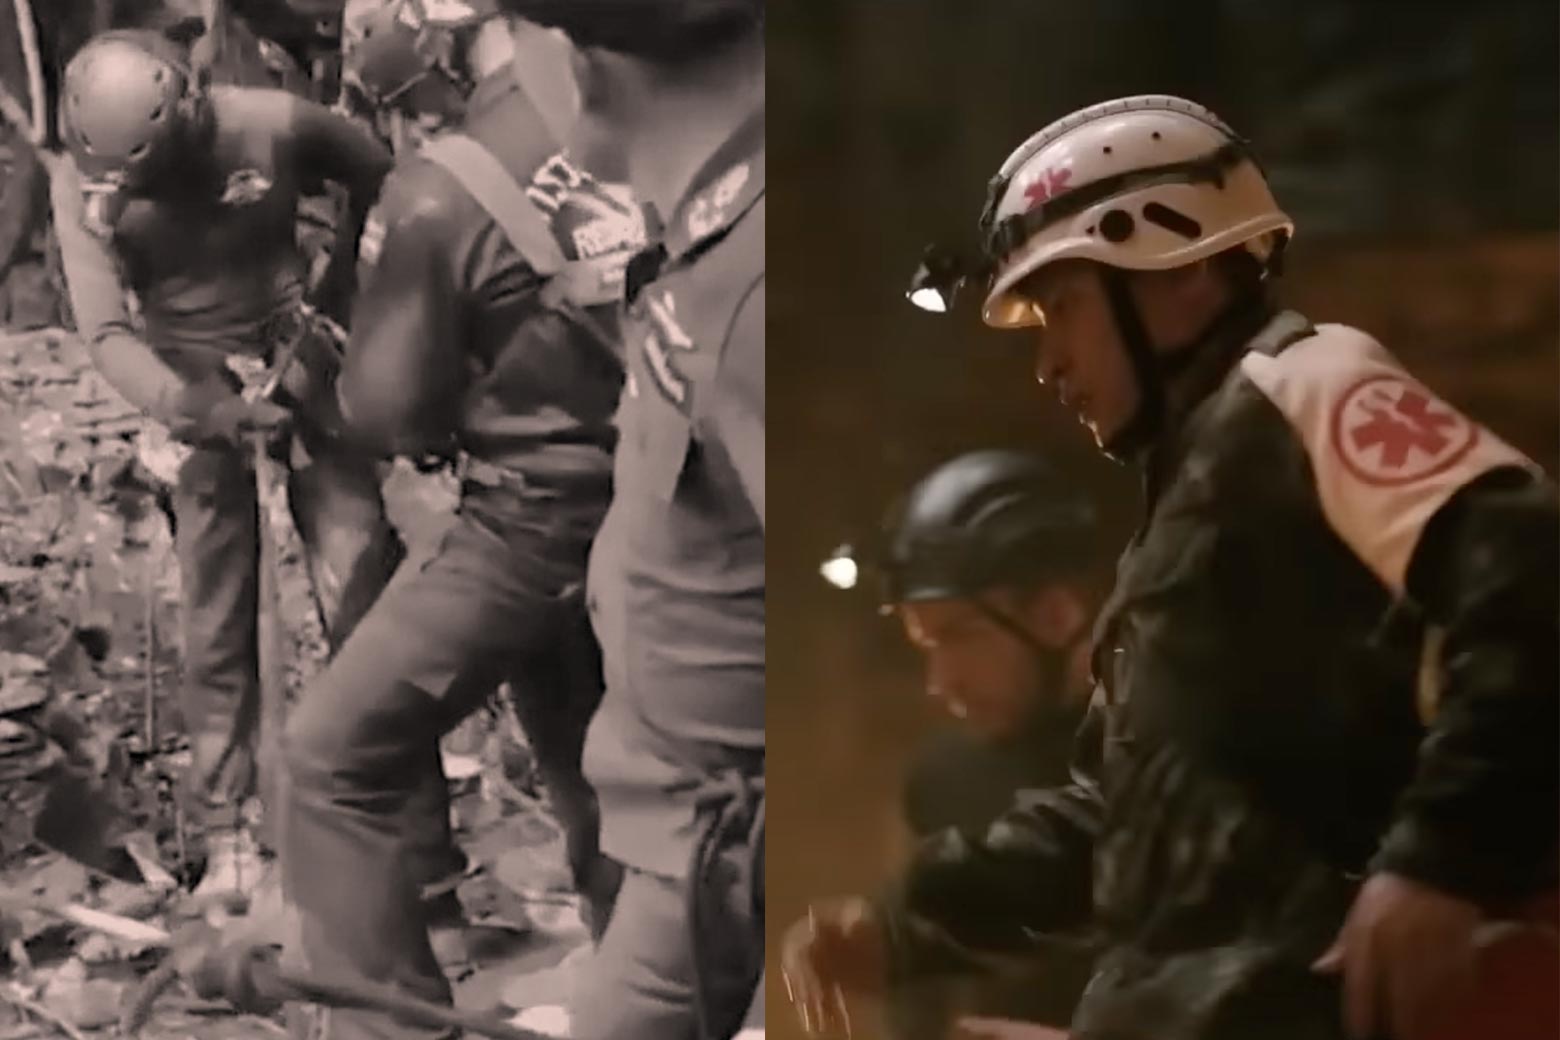 In both images groups of Thai men wear headlamps. On the left, there also appears to be a member of the military looking on.